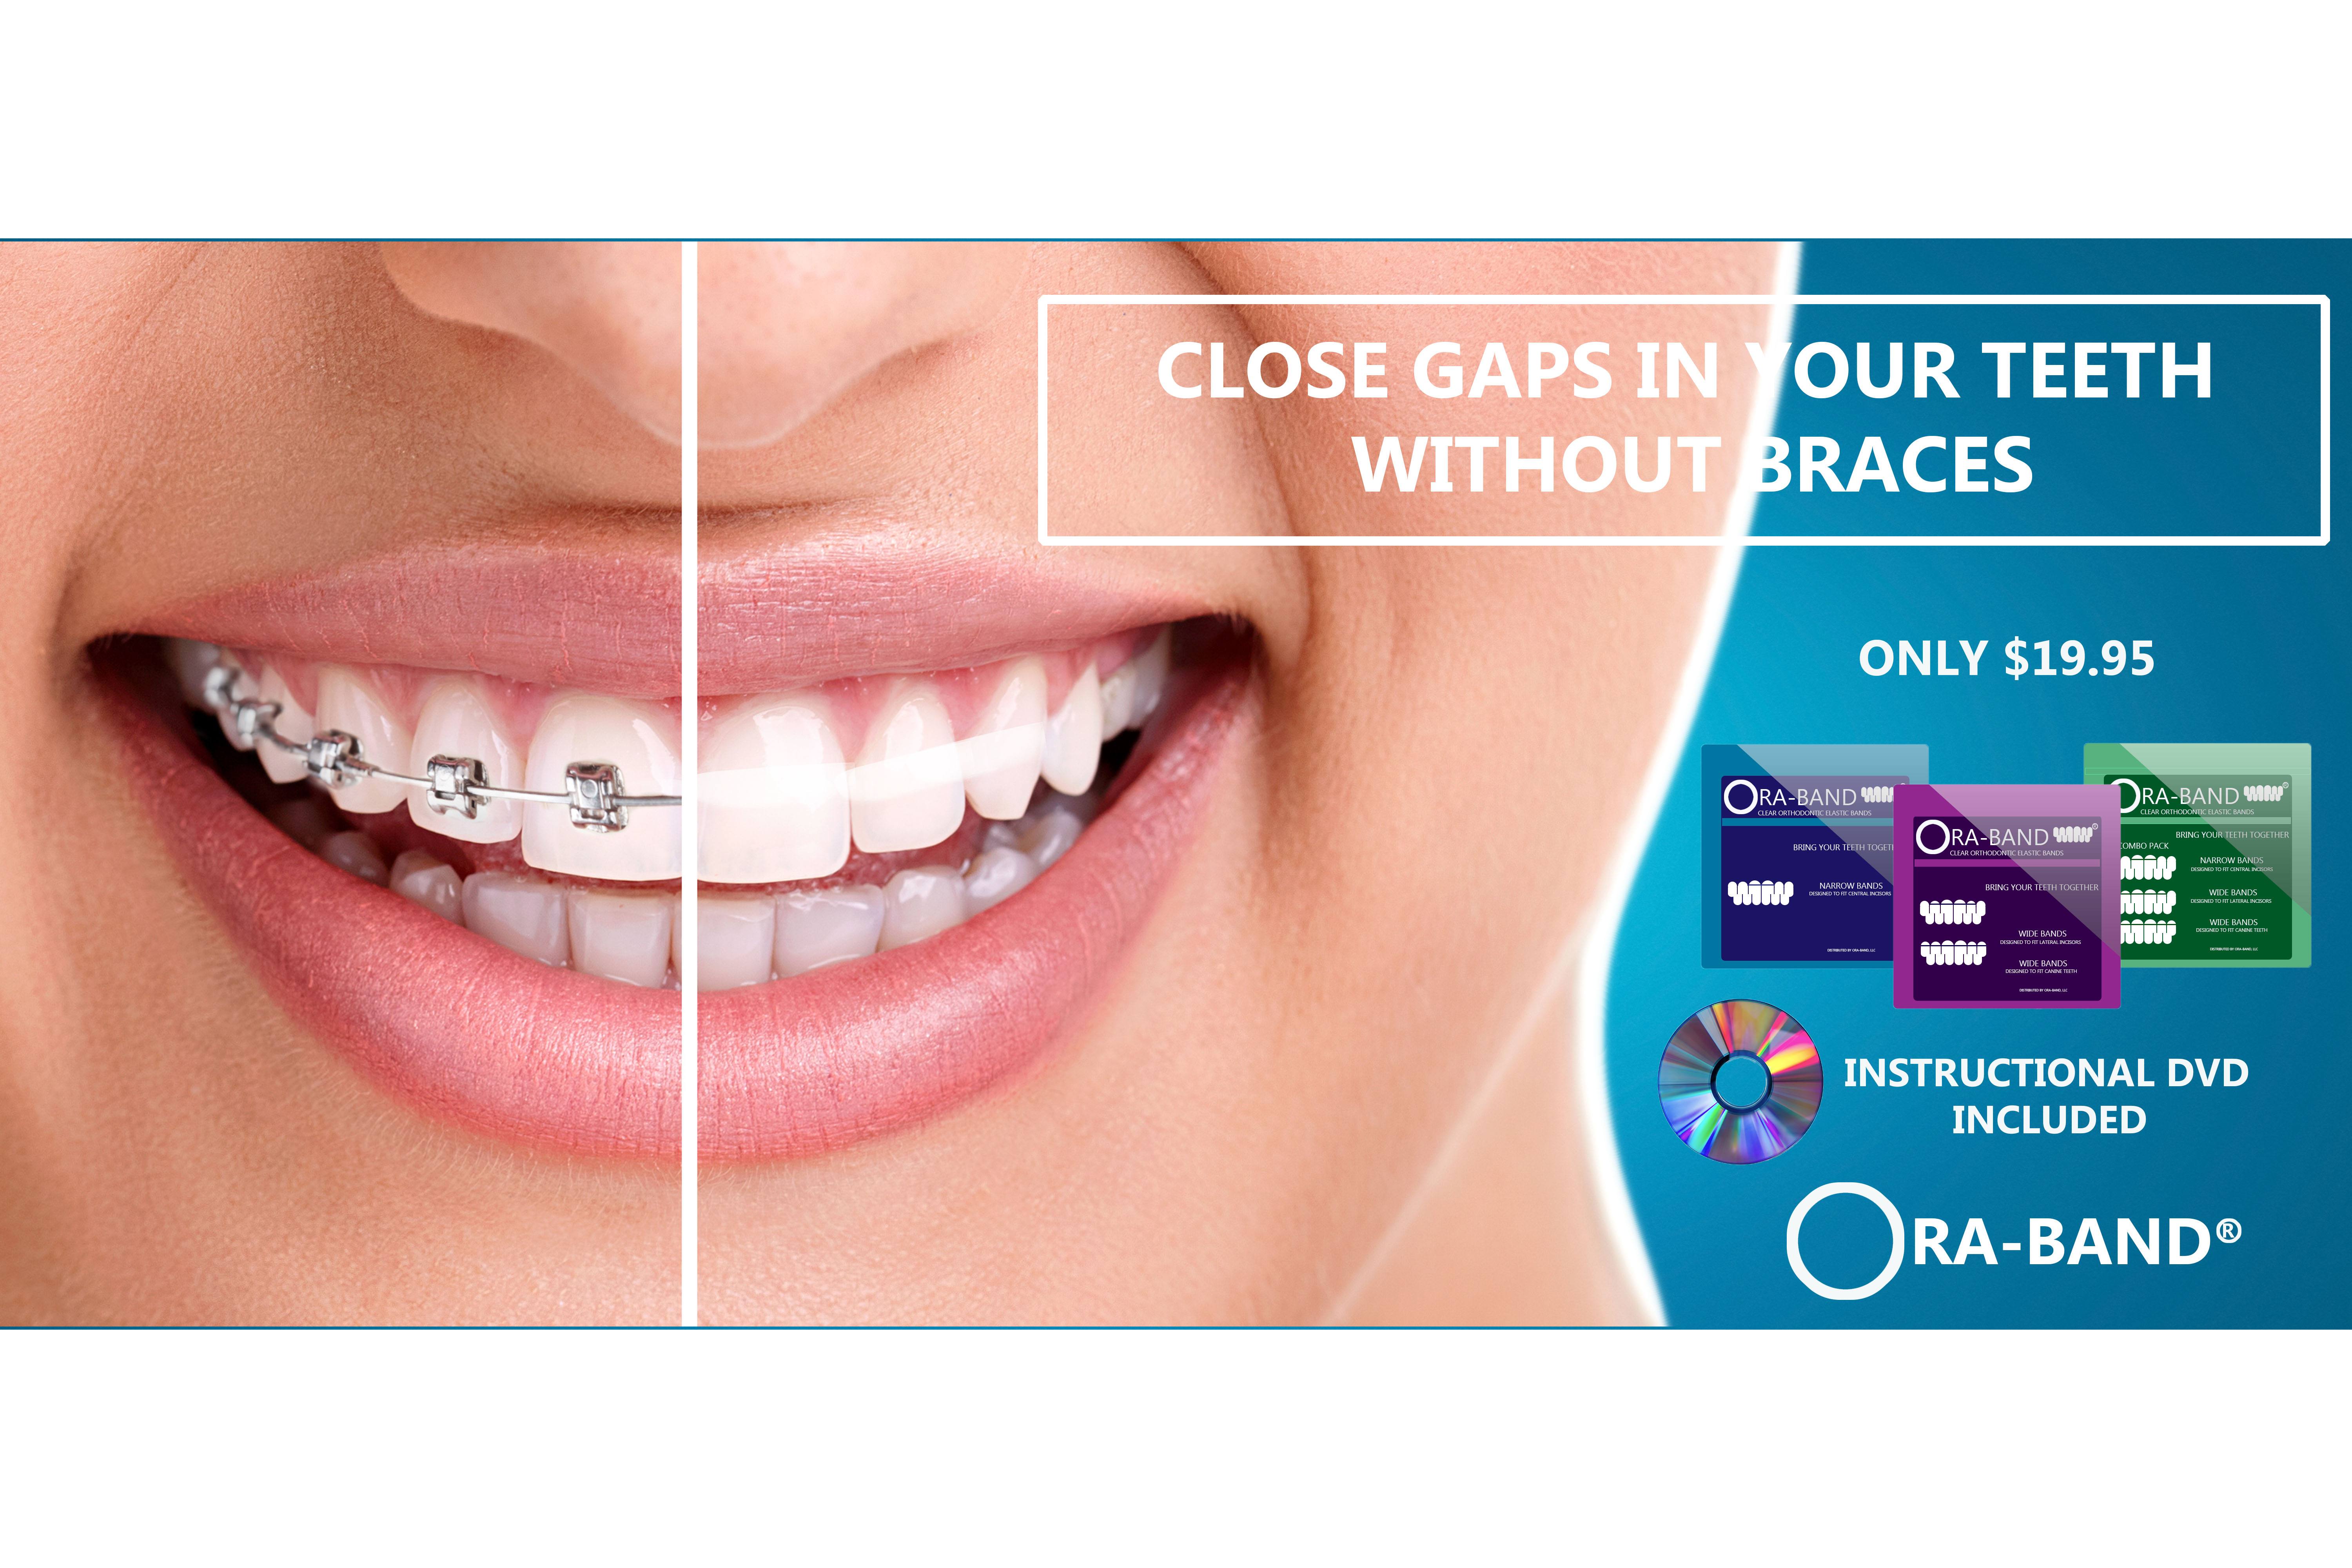 CLOSE GAPS IN YOUR TEETH WITHOUT BRACES